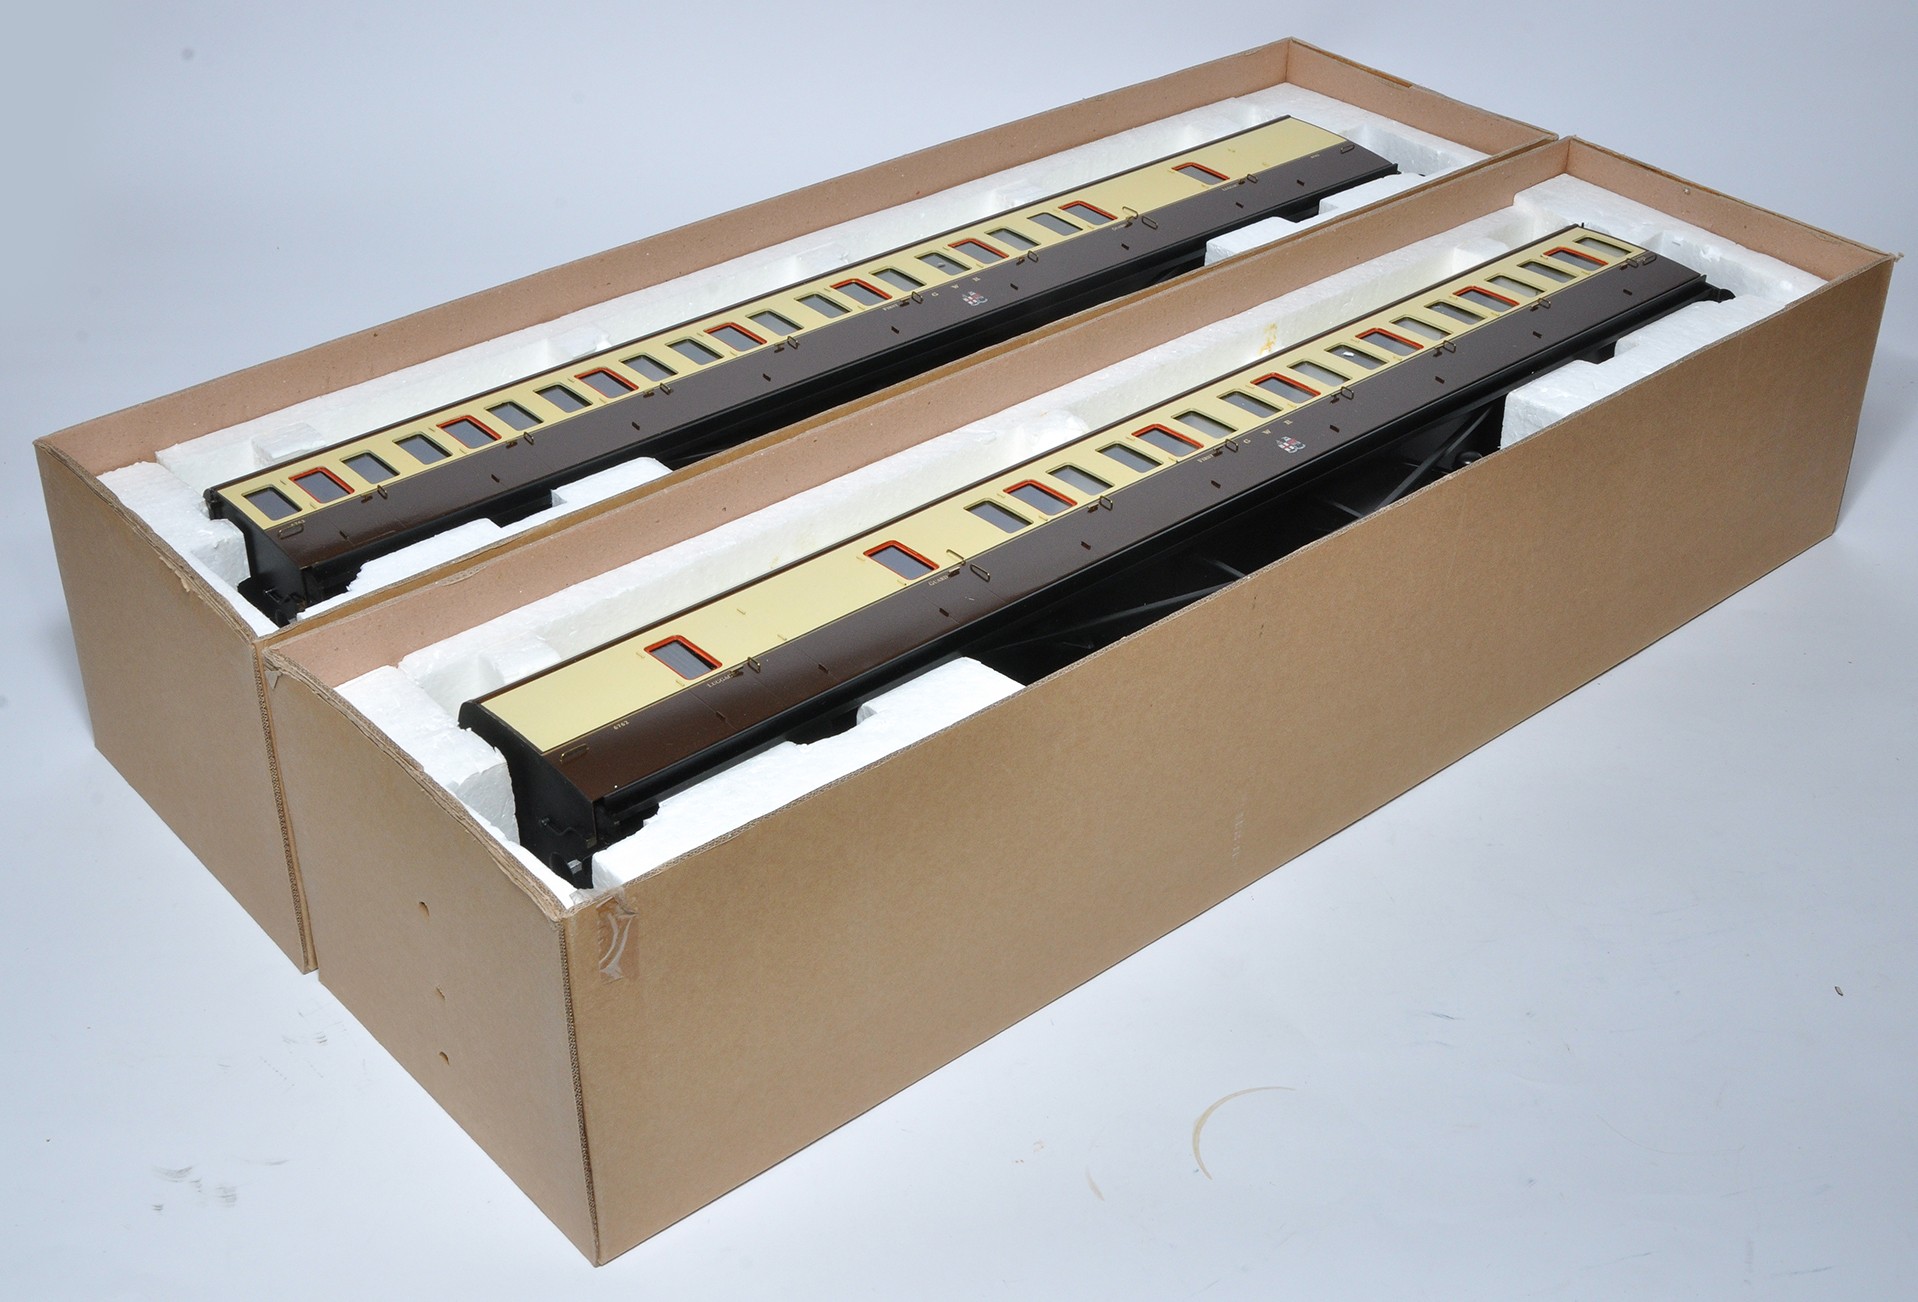 Two GWR G Scale Model Railway Coaches as shown in boxes.